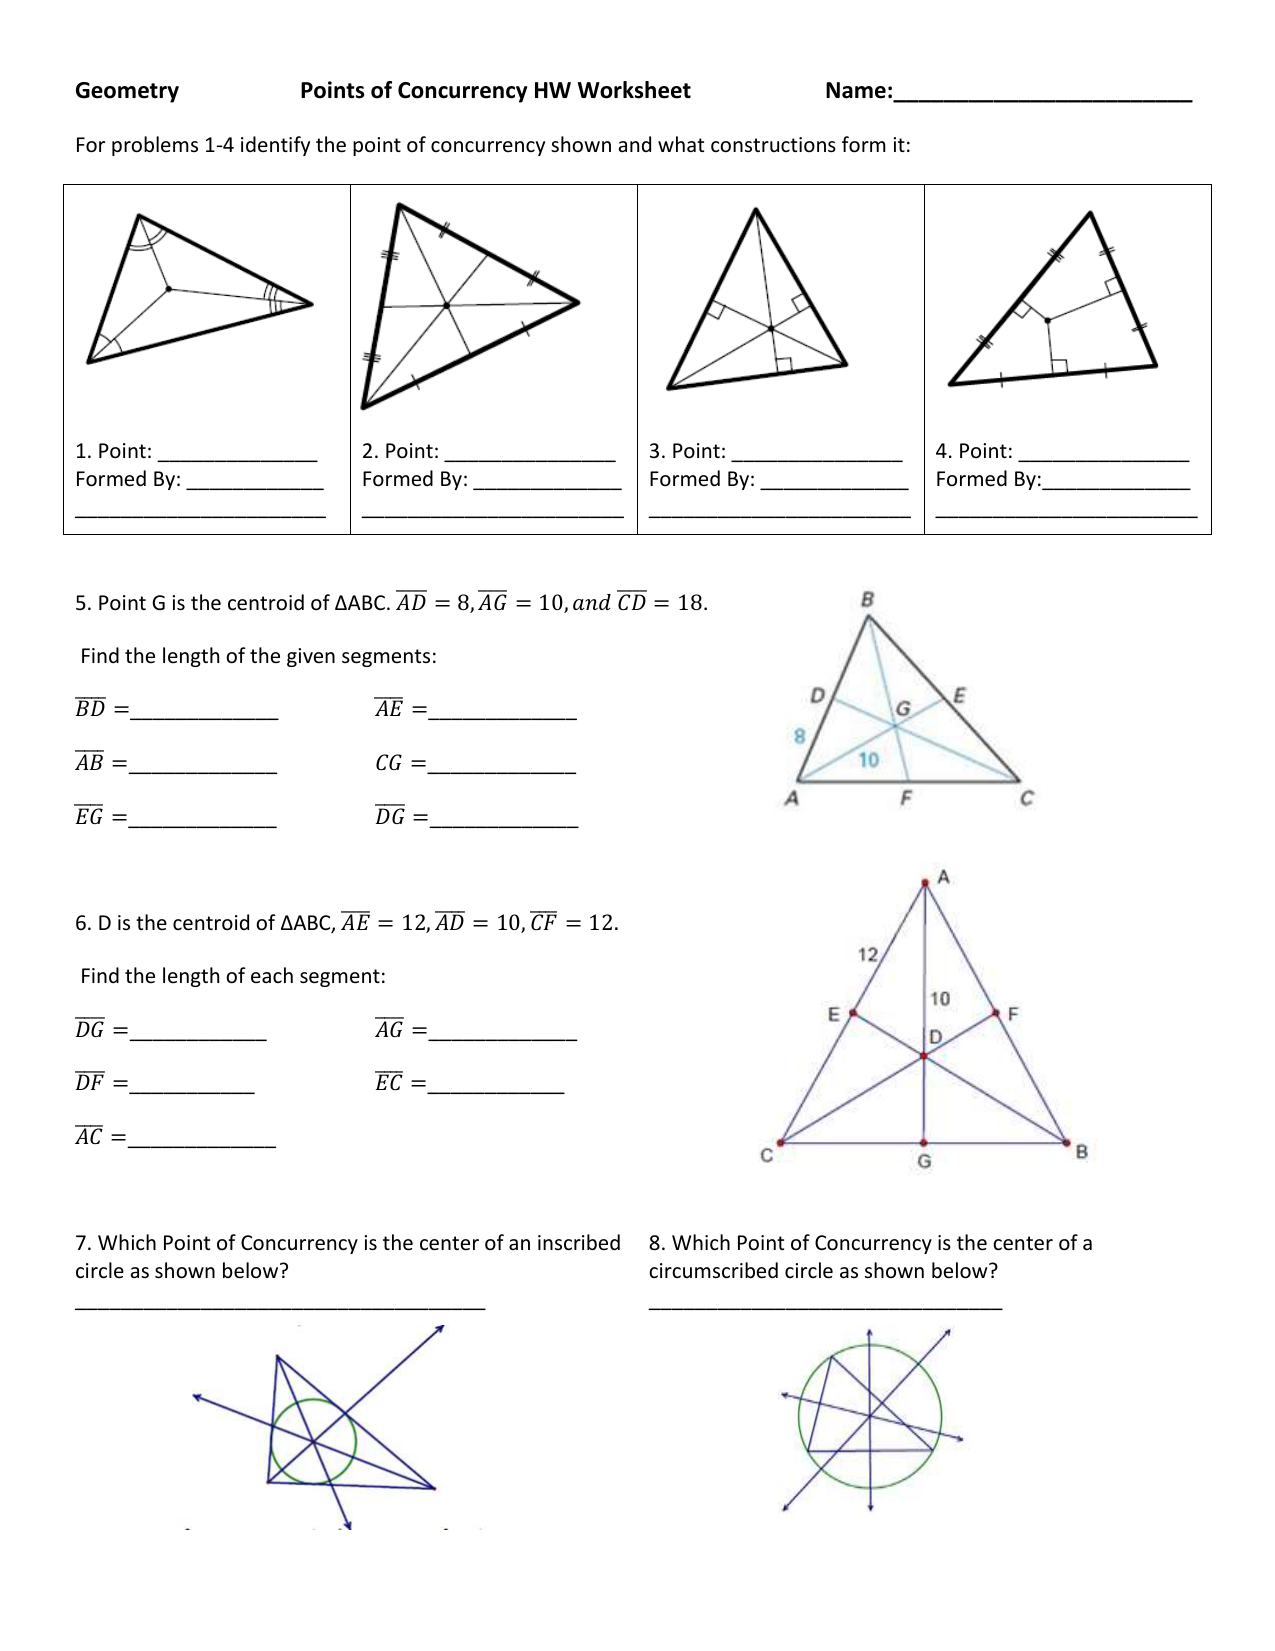 Geometry Points Of Concurrency Worksheet - Promotiontablecovers With Regard To Geometry Points Of Concurrency Worksheet